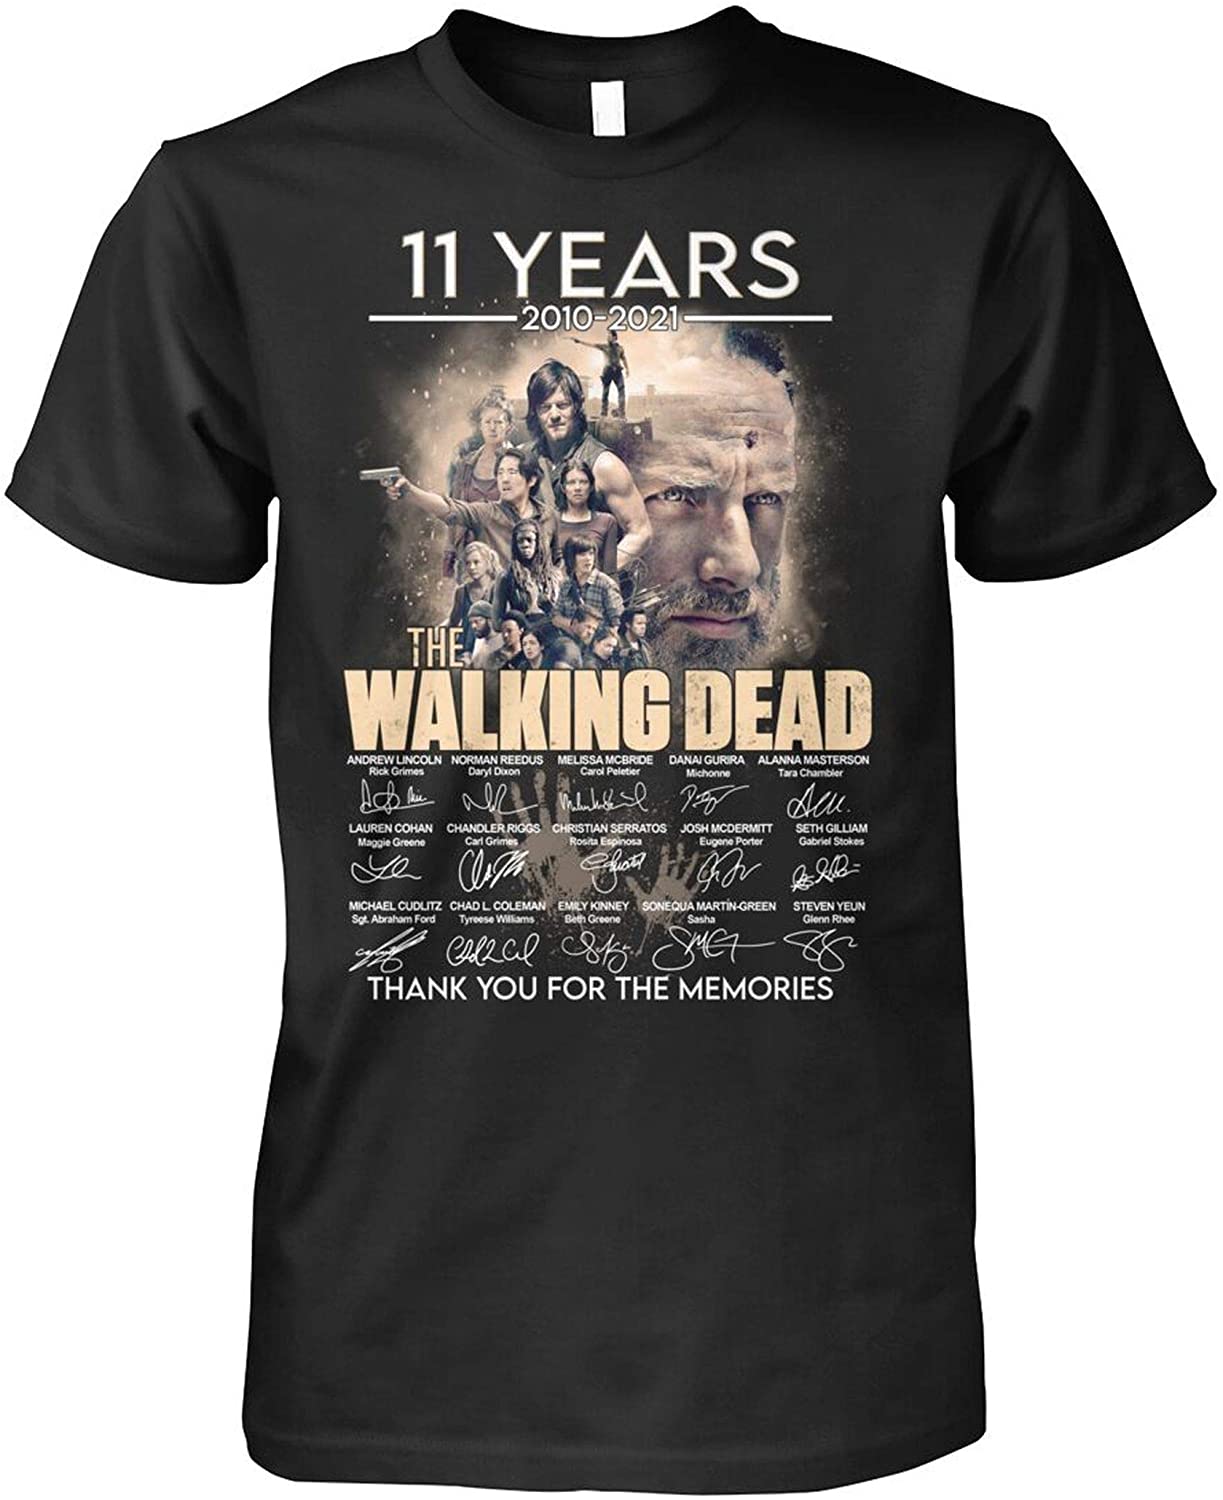 ANDIEZ 11 Years 2010-2021 Walking Dead Thank You for The Memories Shirt